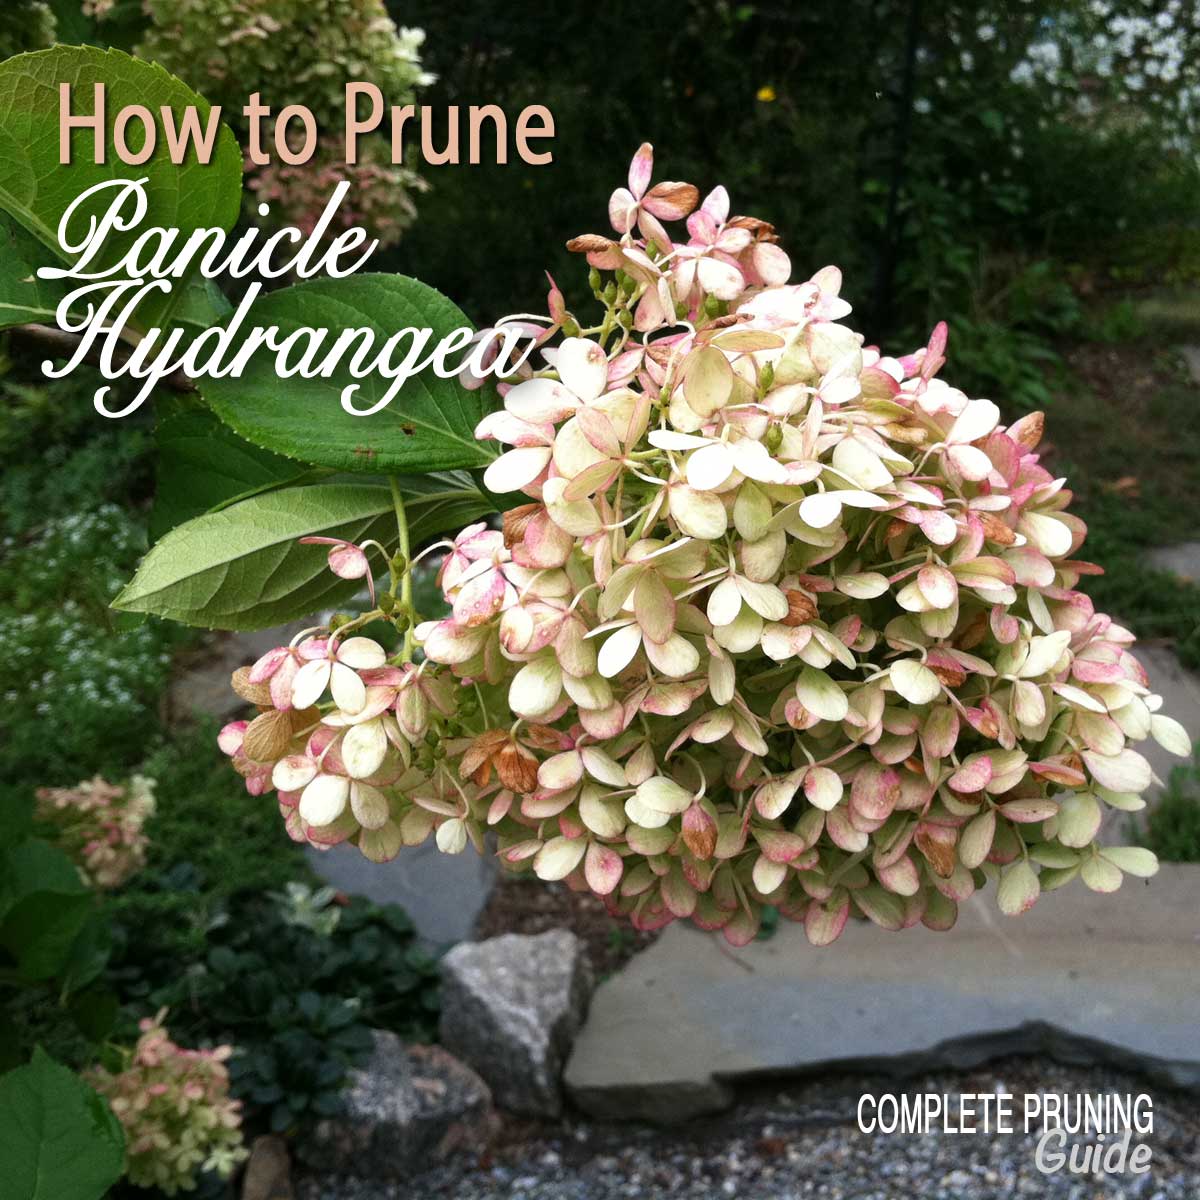 How To Prune Panicle Hydrangeas The Complete Pruning Guide